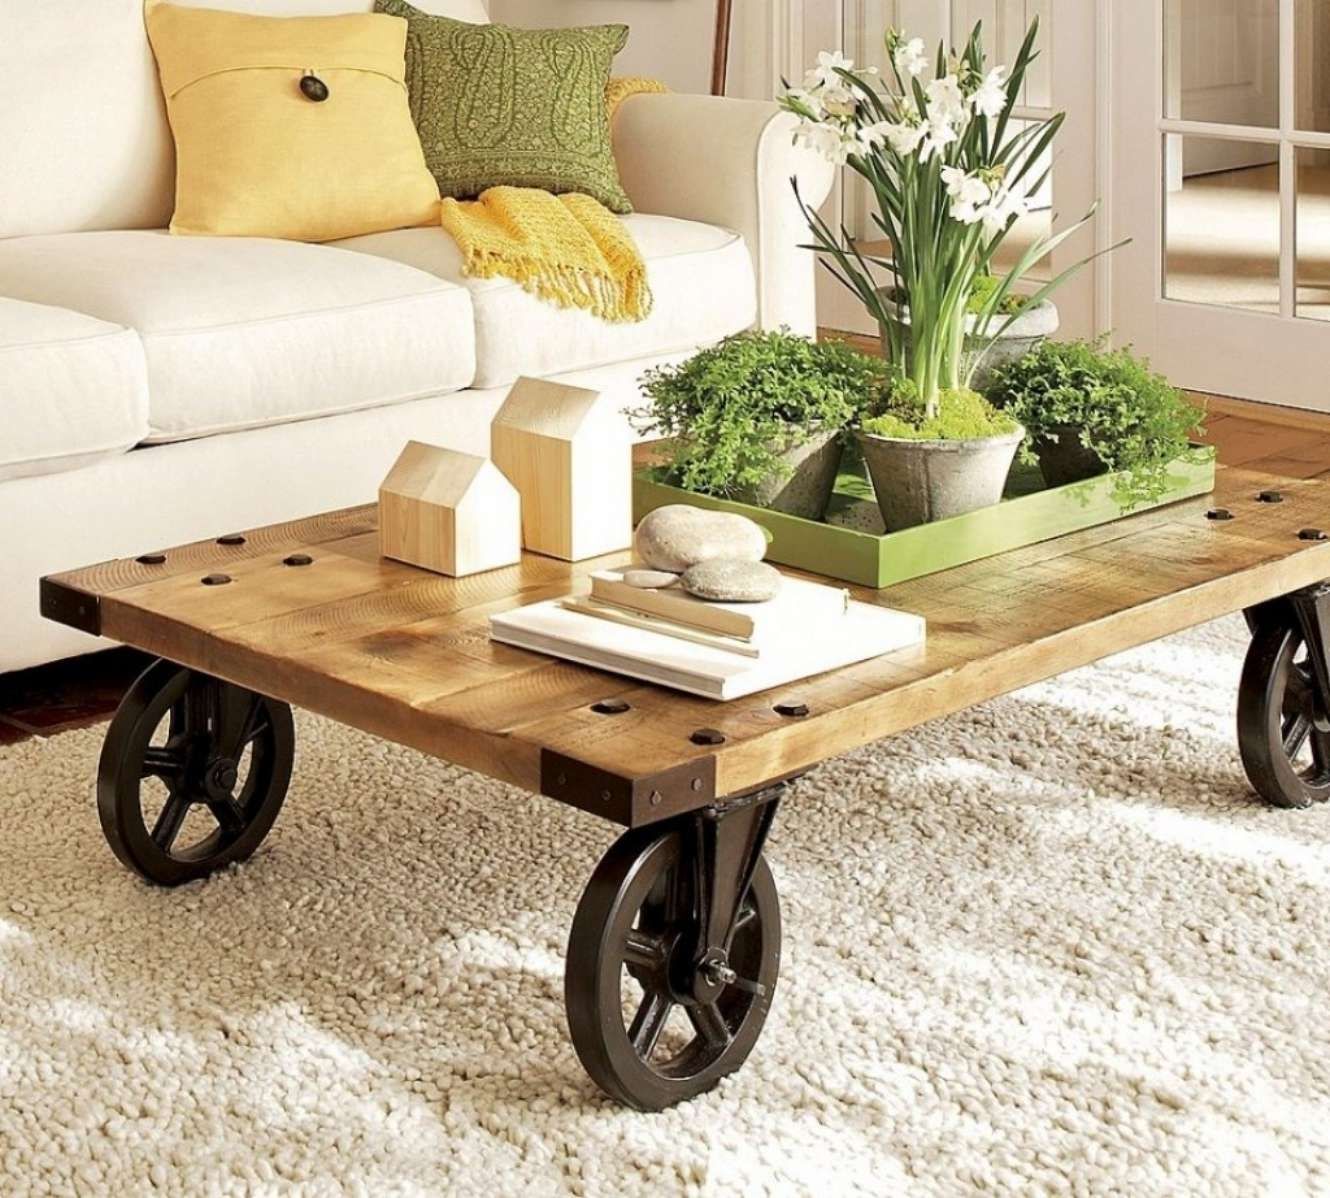 2018 Wheels Coffee Tables Intended For 12 Modern Coffee And Side Tables With Wheels (Gallery 19 of 20)